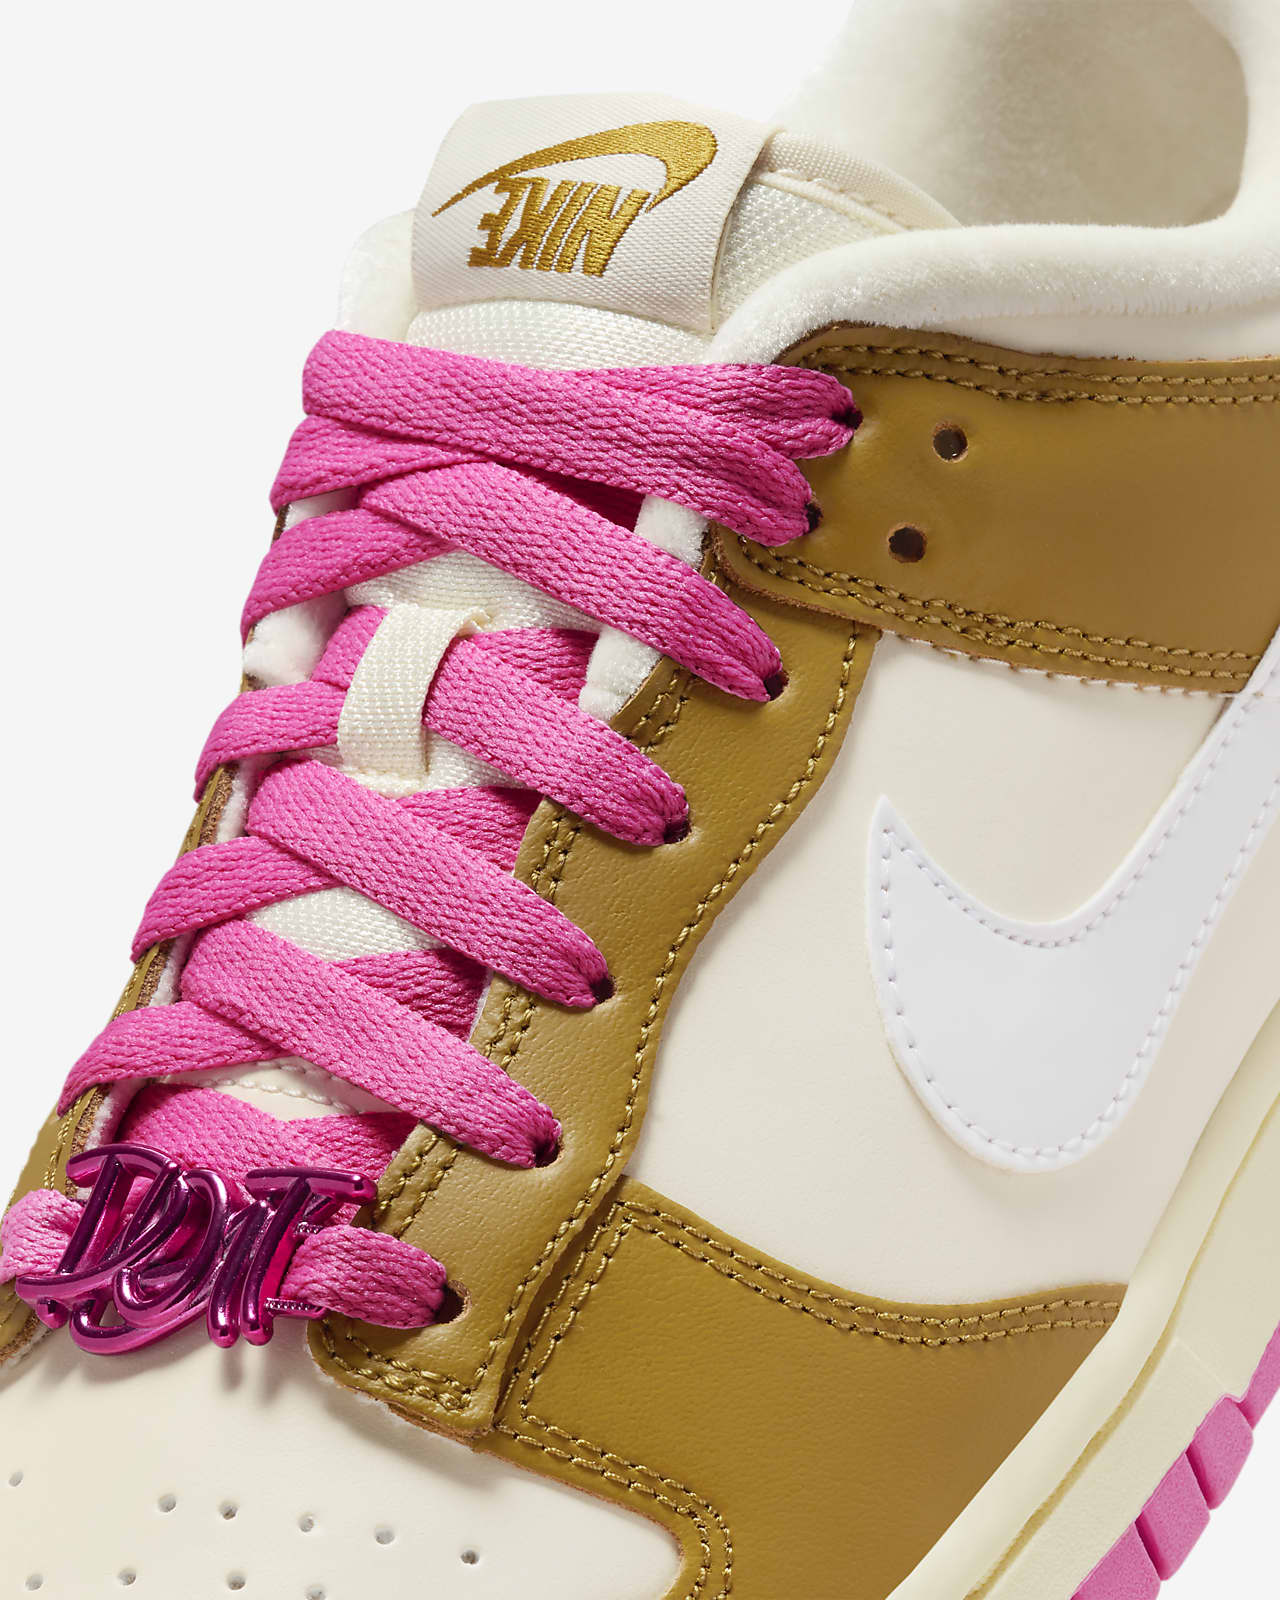 Chaussure Nike Dunk Low SE pour femme. Nike BE